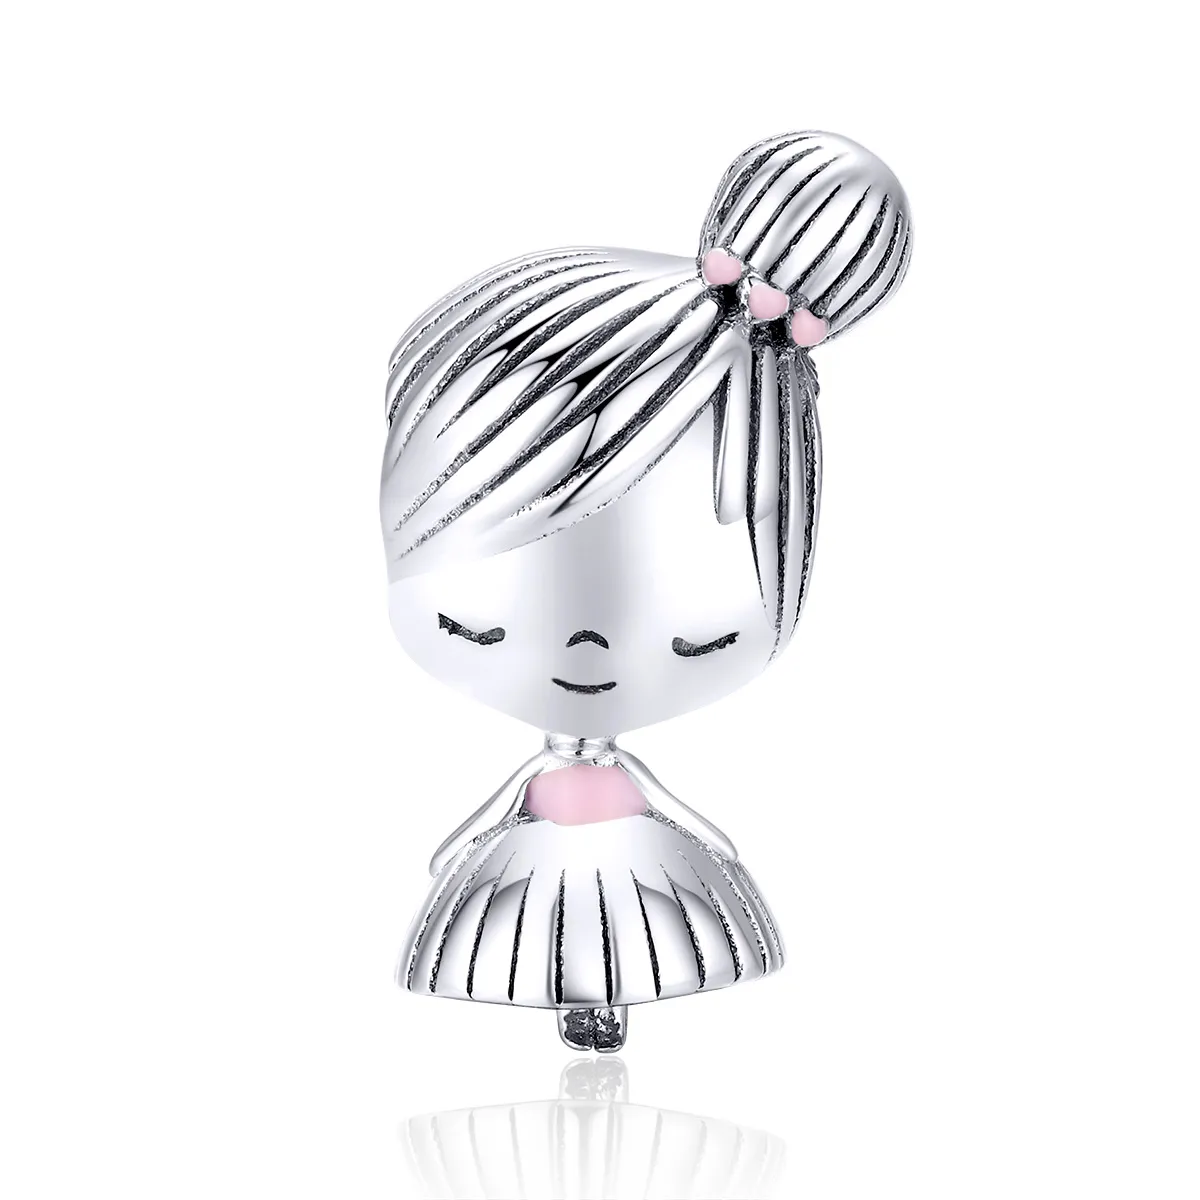 Pandora Style Silver Its A Girl Charm - SCC1335